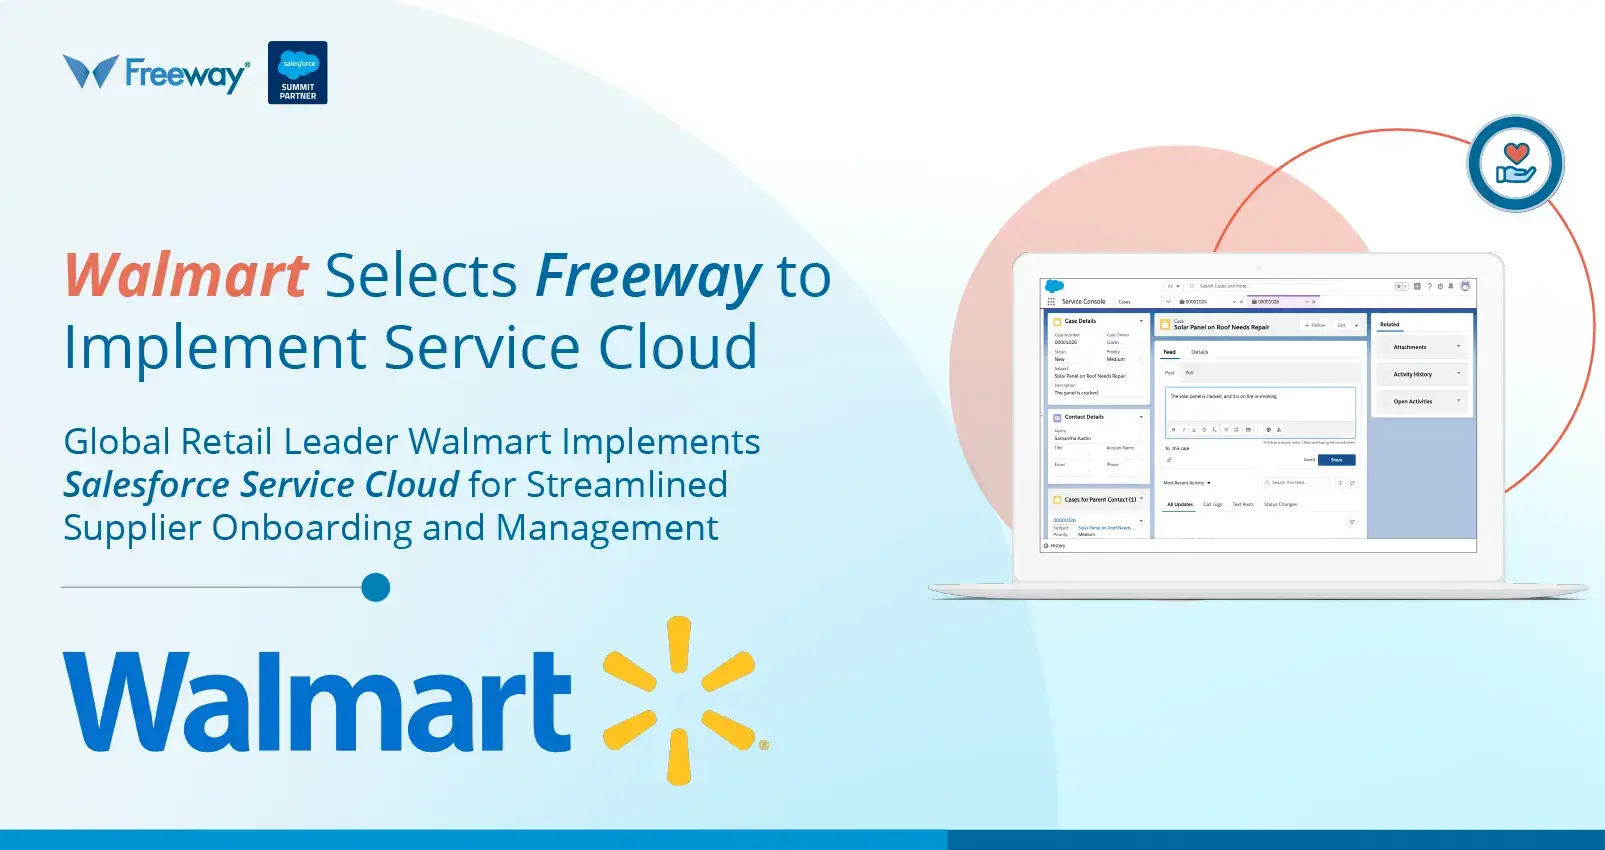 Walmart Selects Freeway to Implement Service Cloud